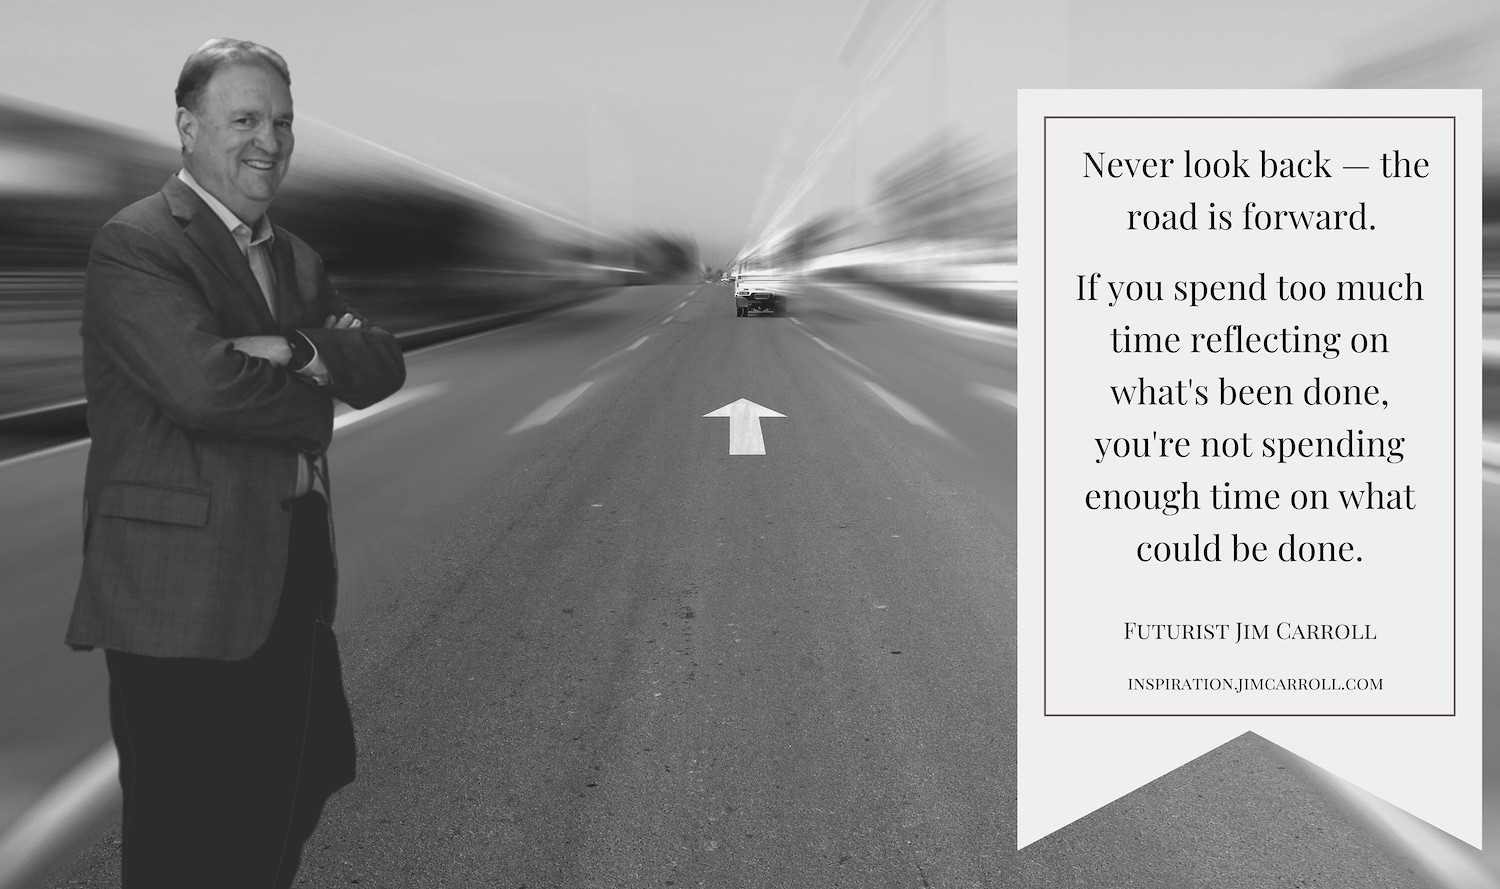 "Never look back - the road is forward. If you spend too much time reflecting on what's been done, you're not spending enough time on what could be done." - Futurist Jim Carroll